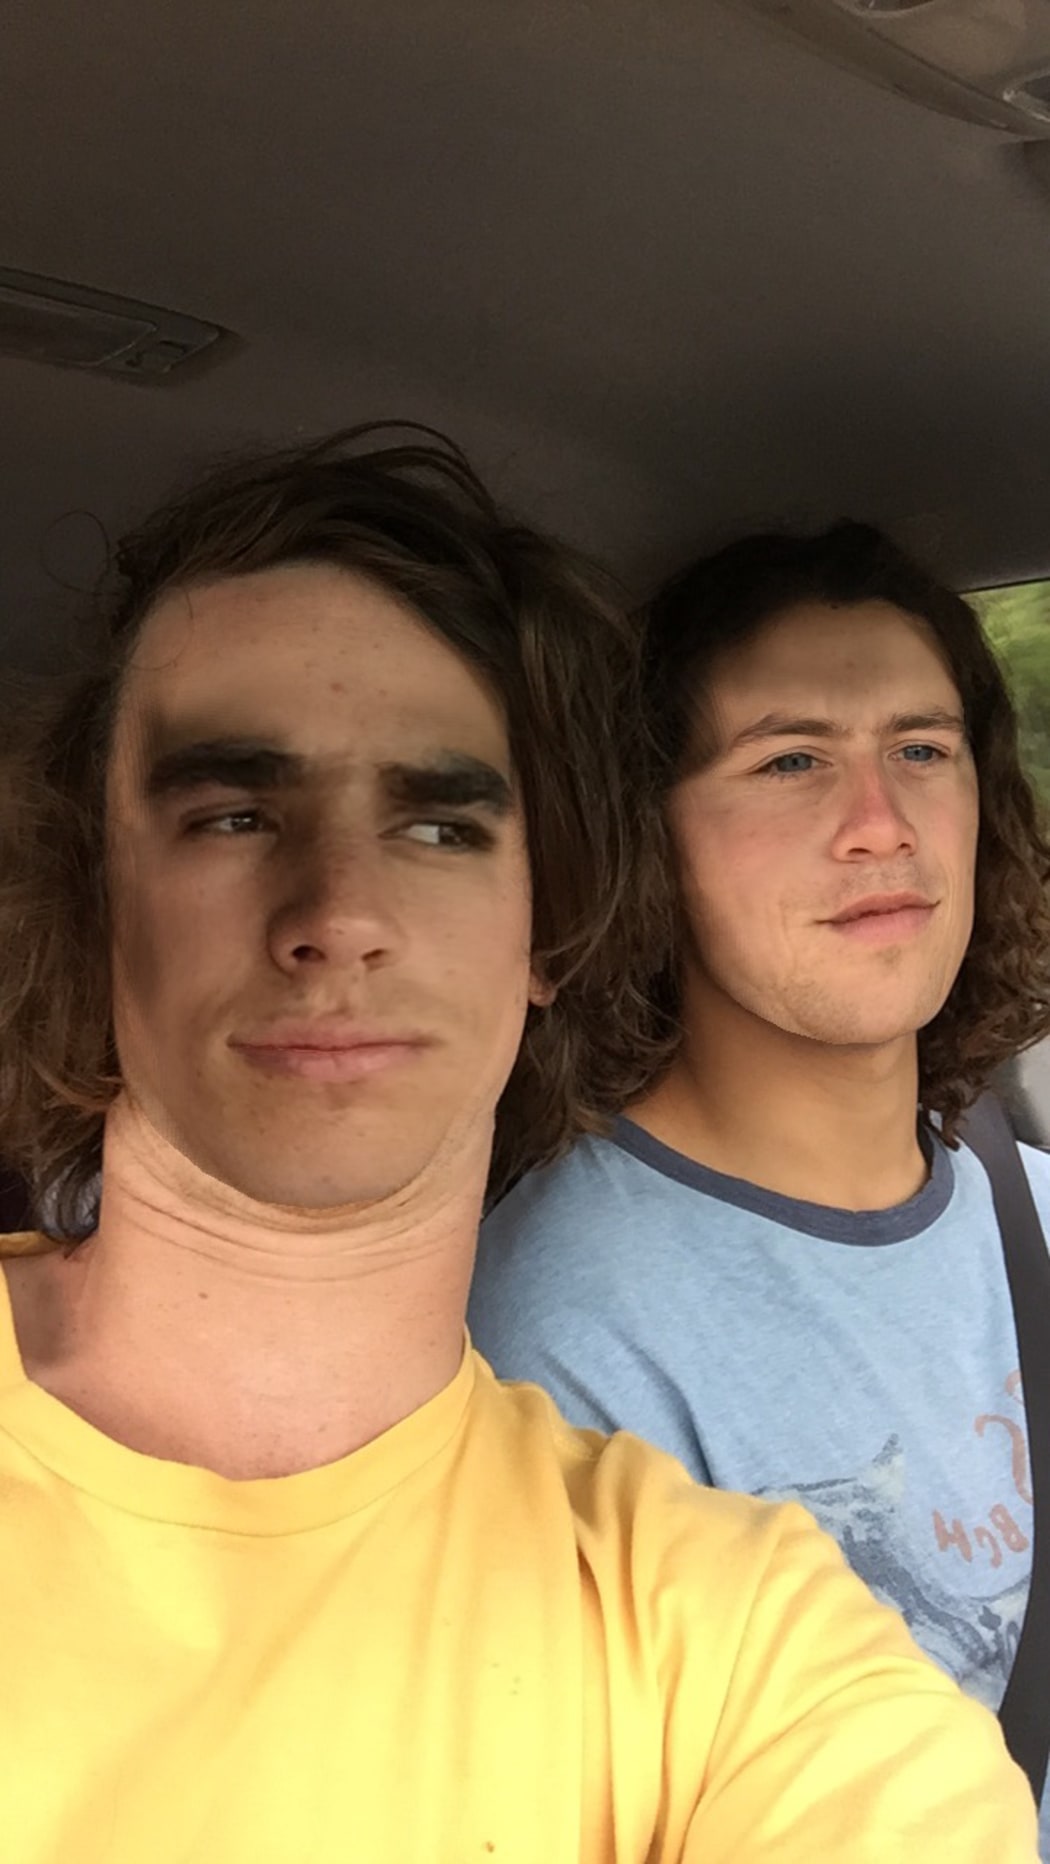 Semisi Maiai & Isaac Kennedy, face-swapped